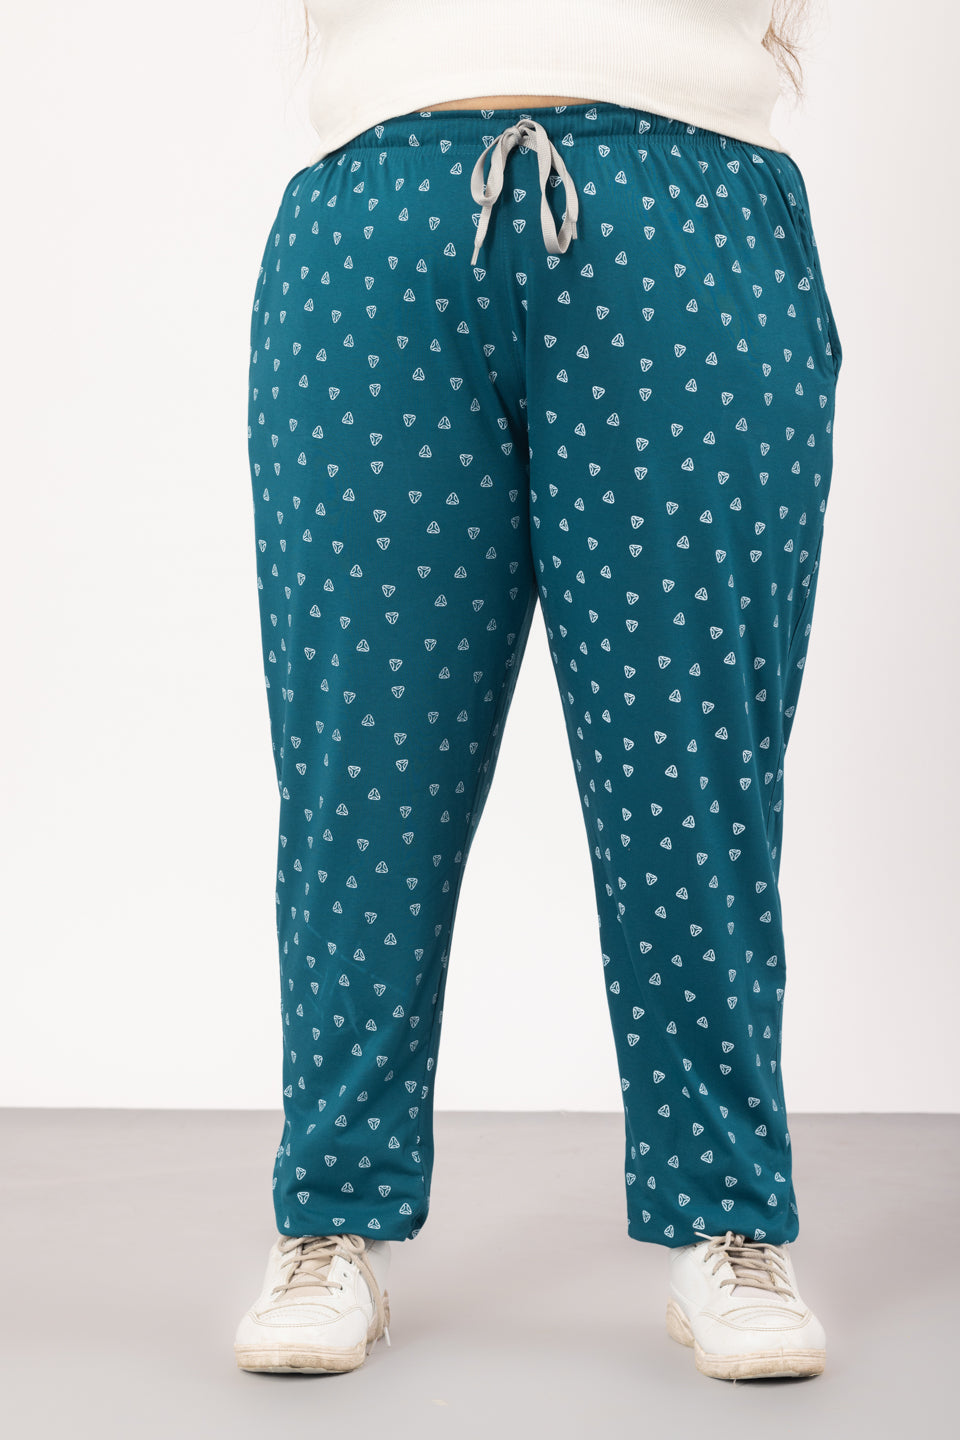 Cotton Printed Night Pants For Women - Teal Blue